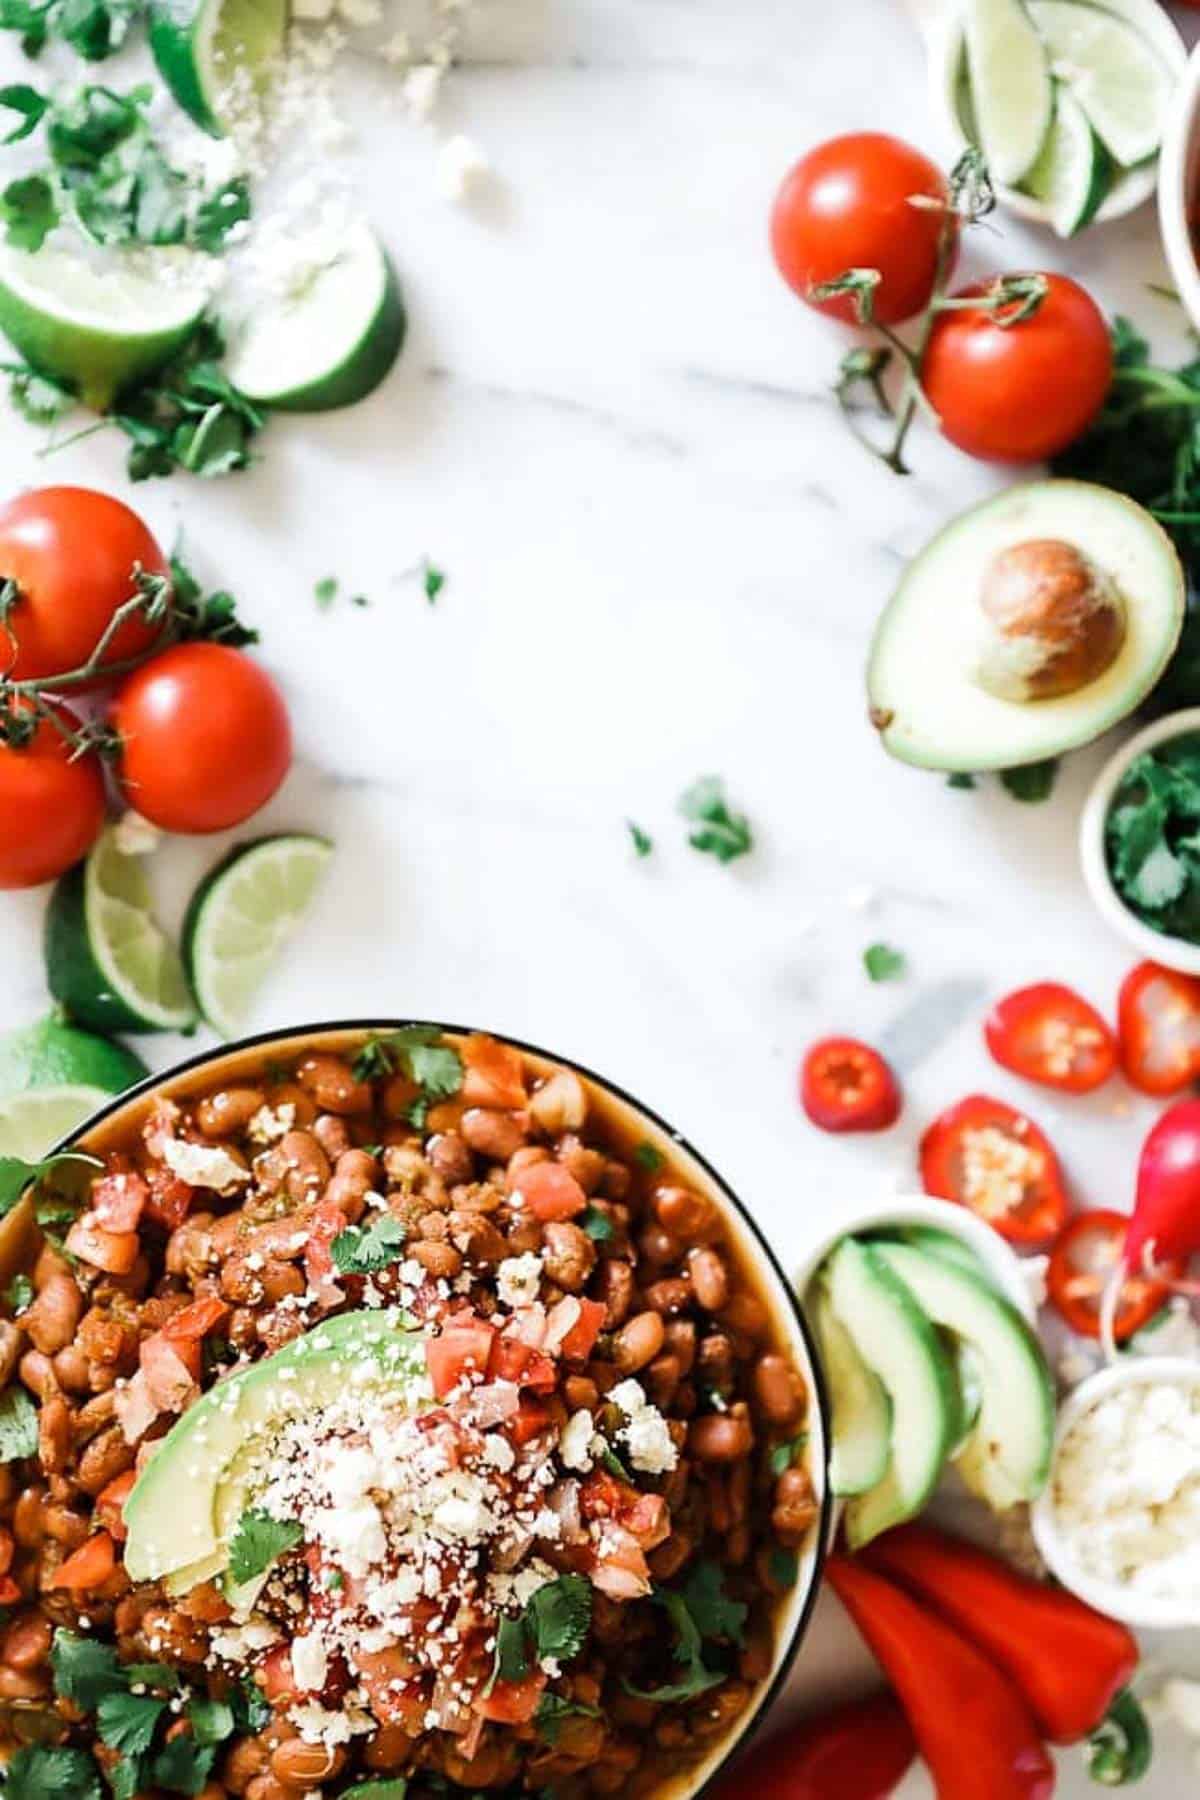 Pressure cooker pinto beans in a black rimmed bowl surrounded by tomatoes, avocado, and peppers.